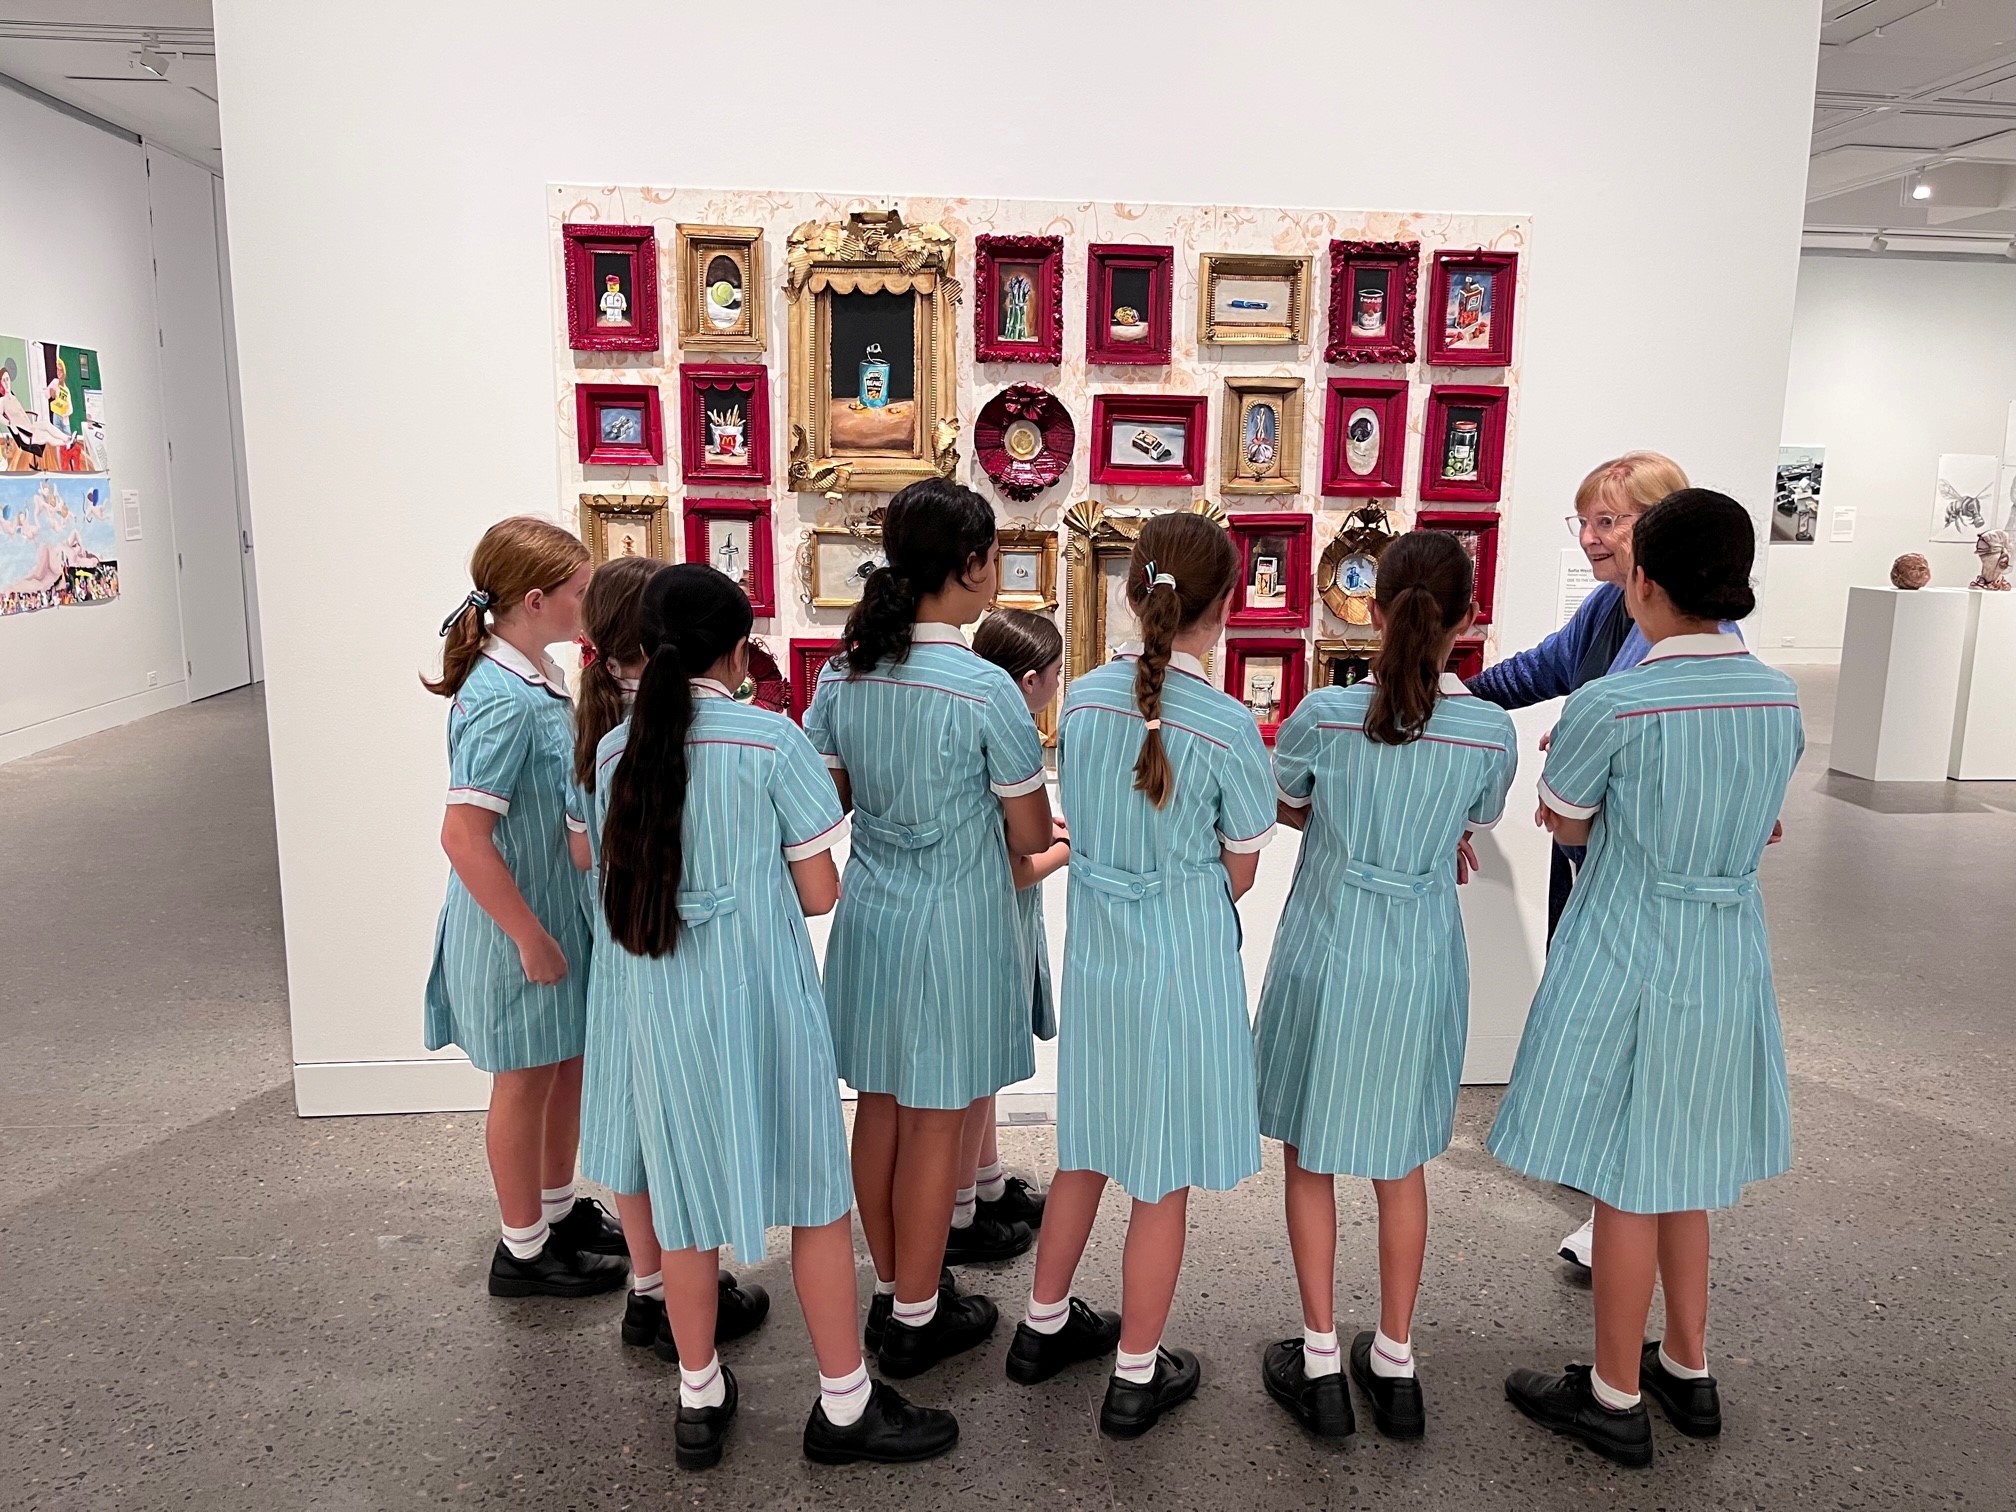 Six female high school students standing in front of an artwork made up of many tiny dark red and gold frames listening to a guide.